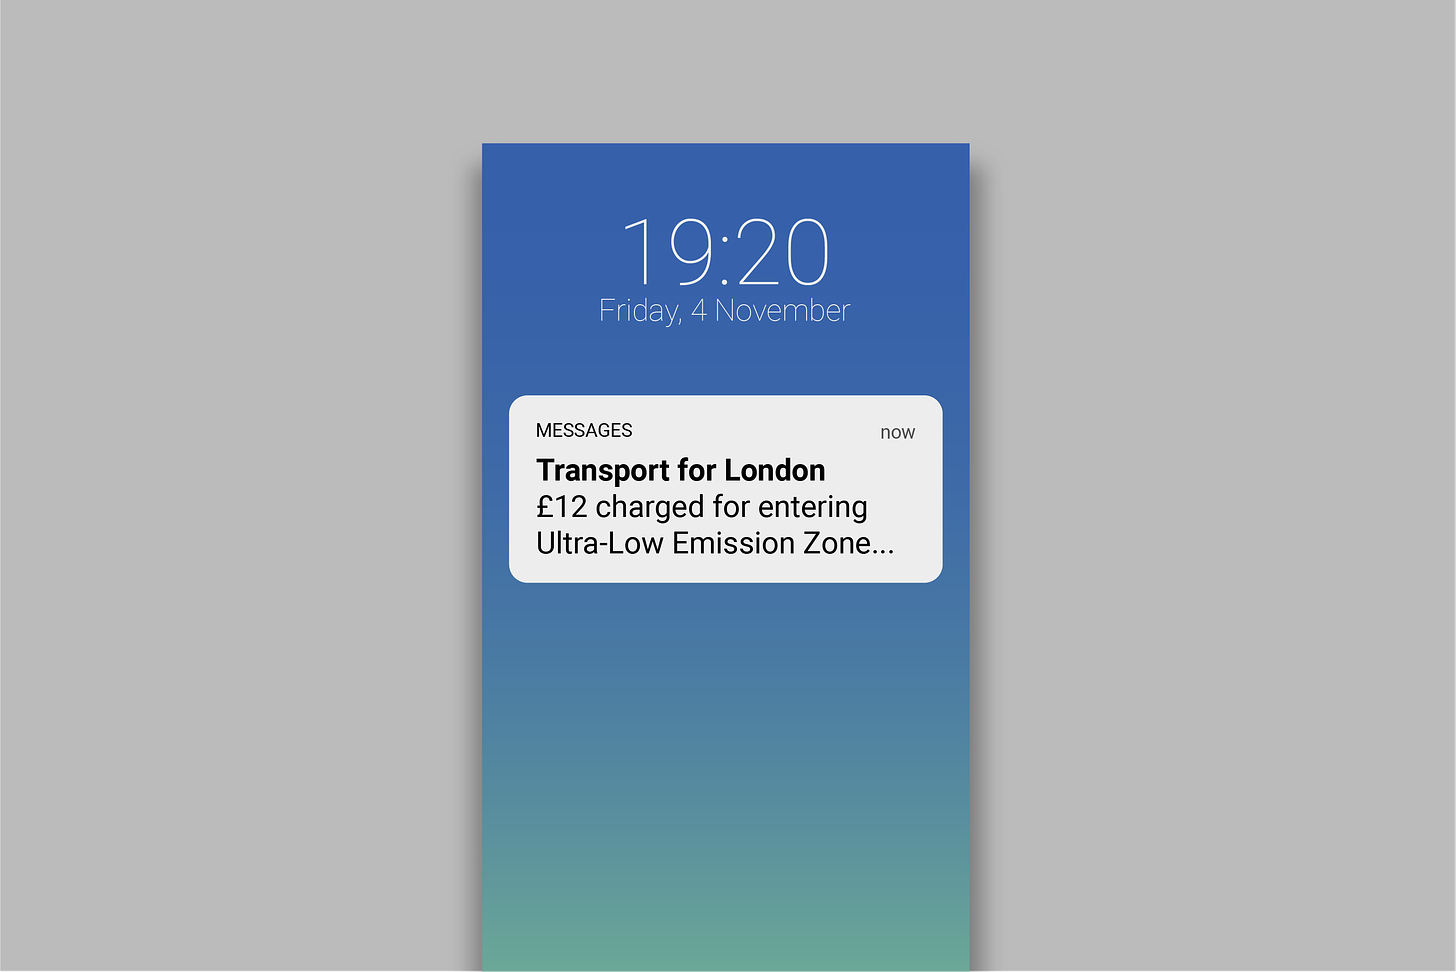 Text messaged on phone screen reading 'Transport for London. £12 charged for entering Ultra-Low Emission Zone'